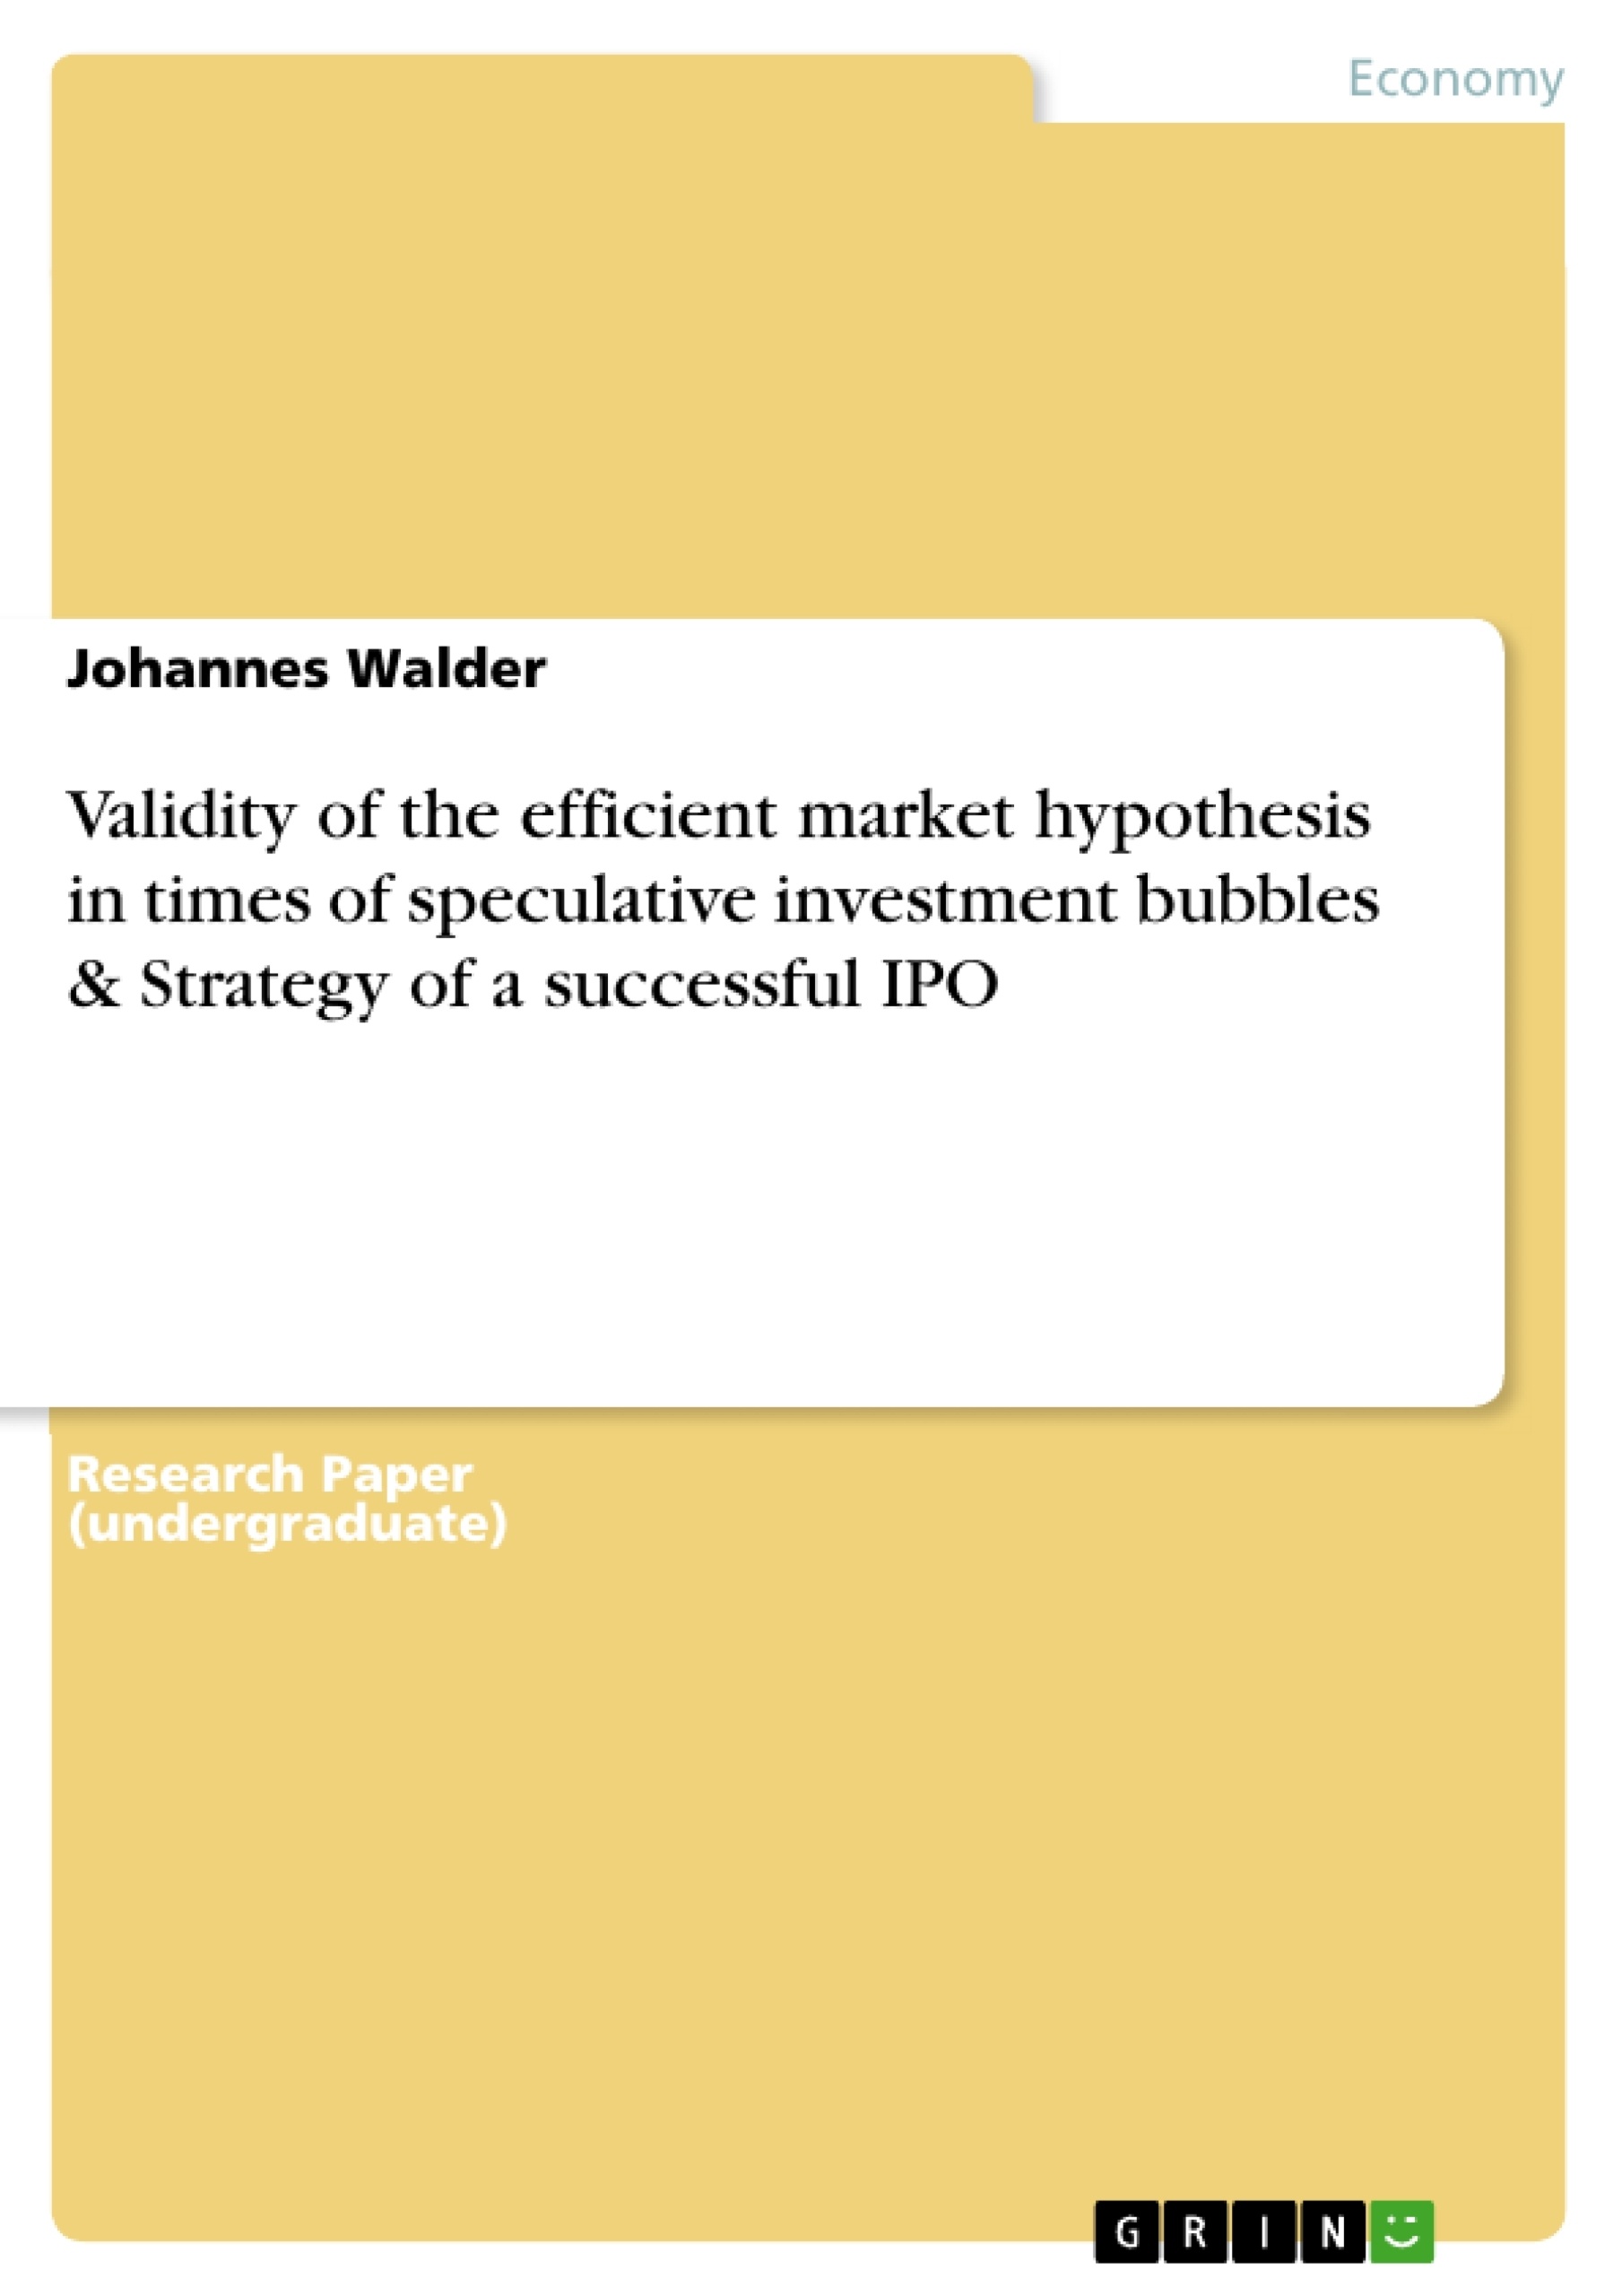 Title: Validity of the efficient market hypothesis in times of speculative investment bubbles  & Strategy of a successful IPO